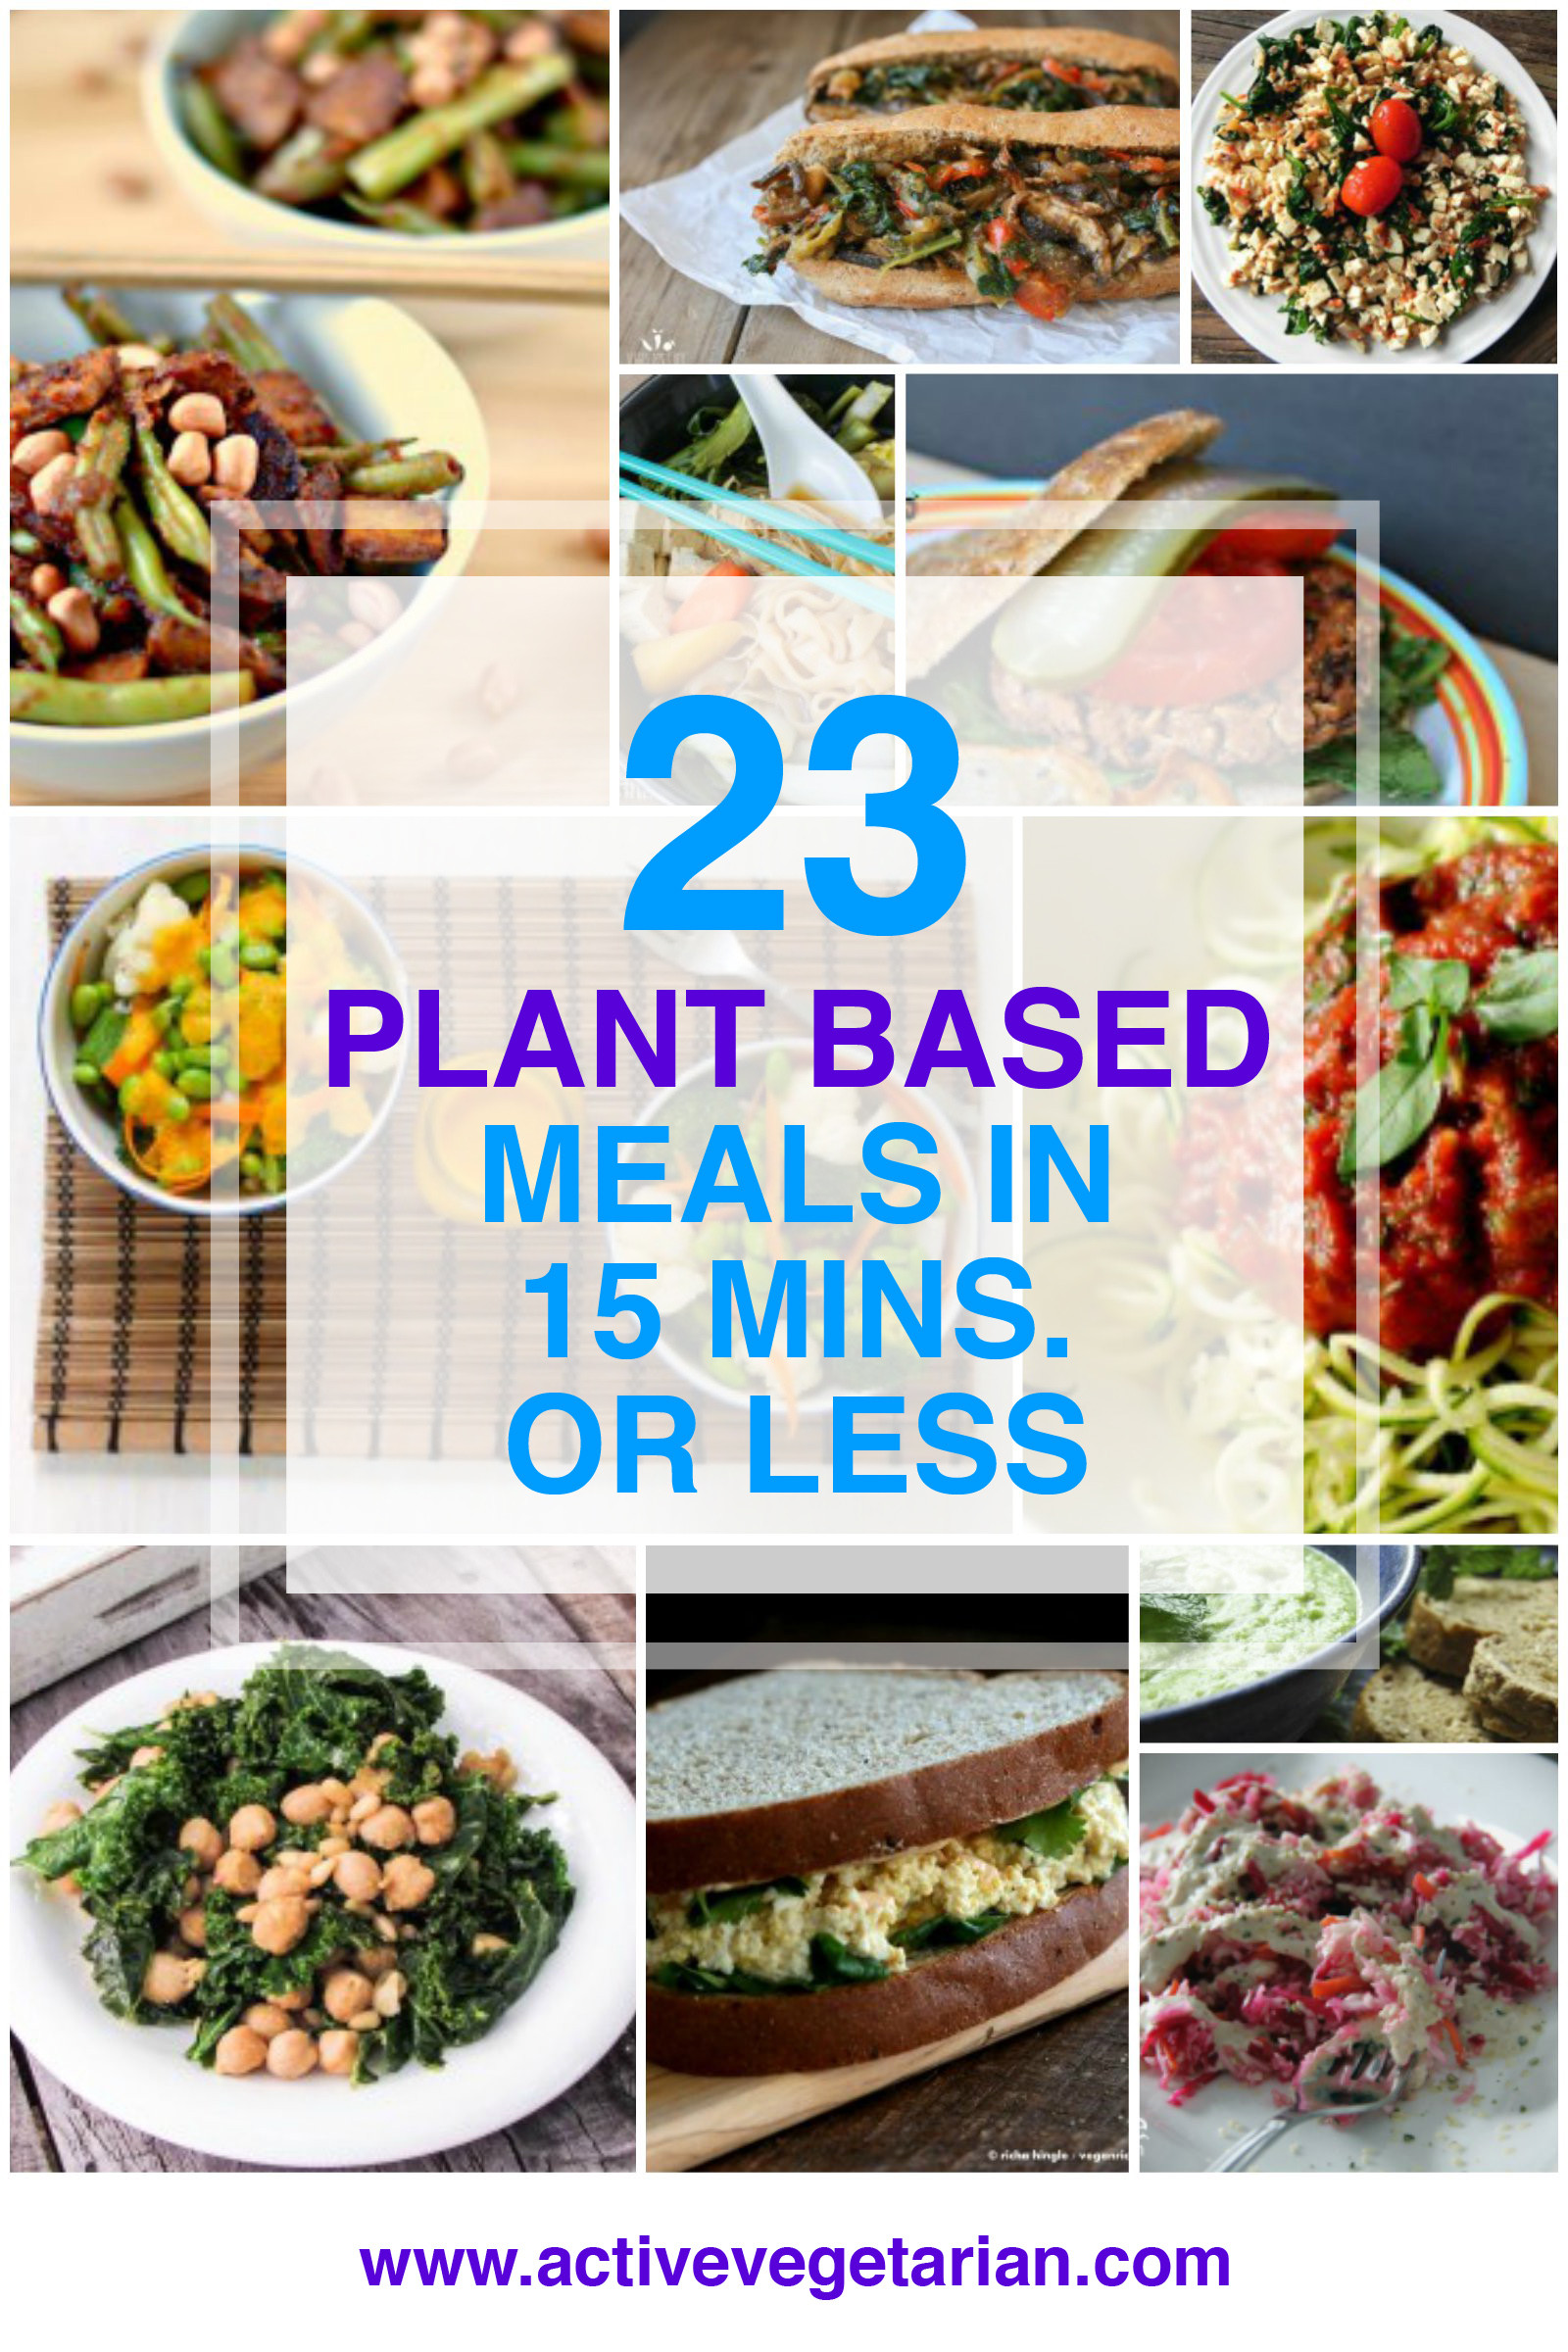 Plant Based Diet Recipes Dinner
 23 Plant Based Meals in 15 Minutes or Less